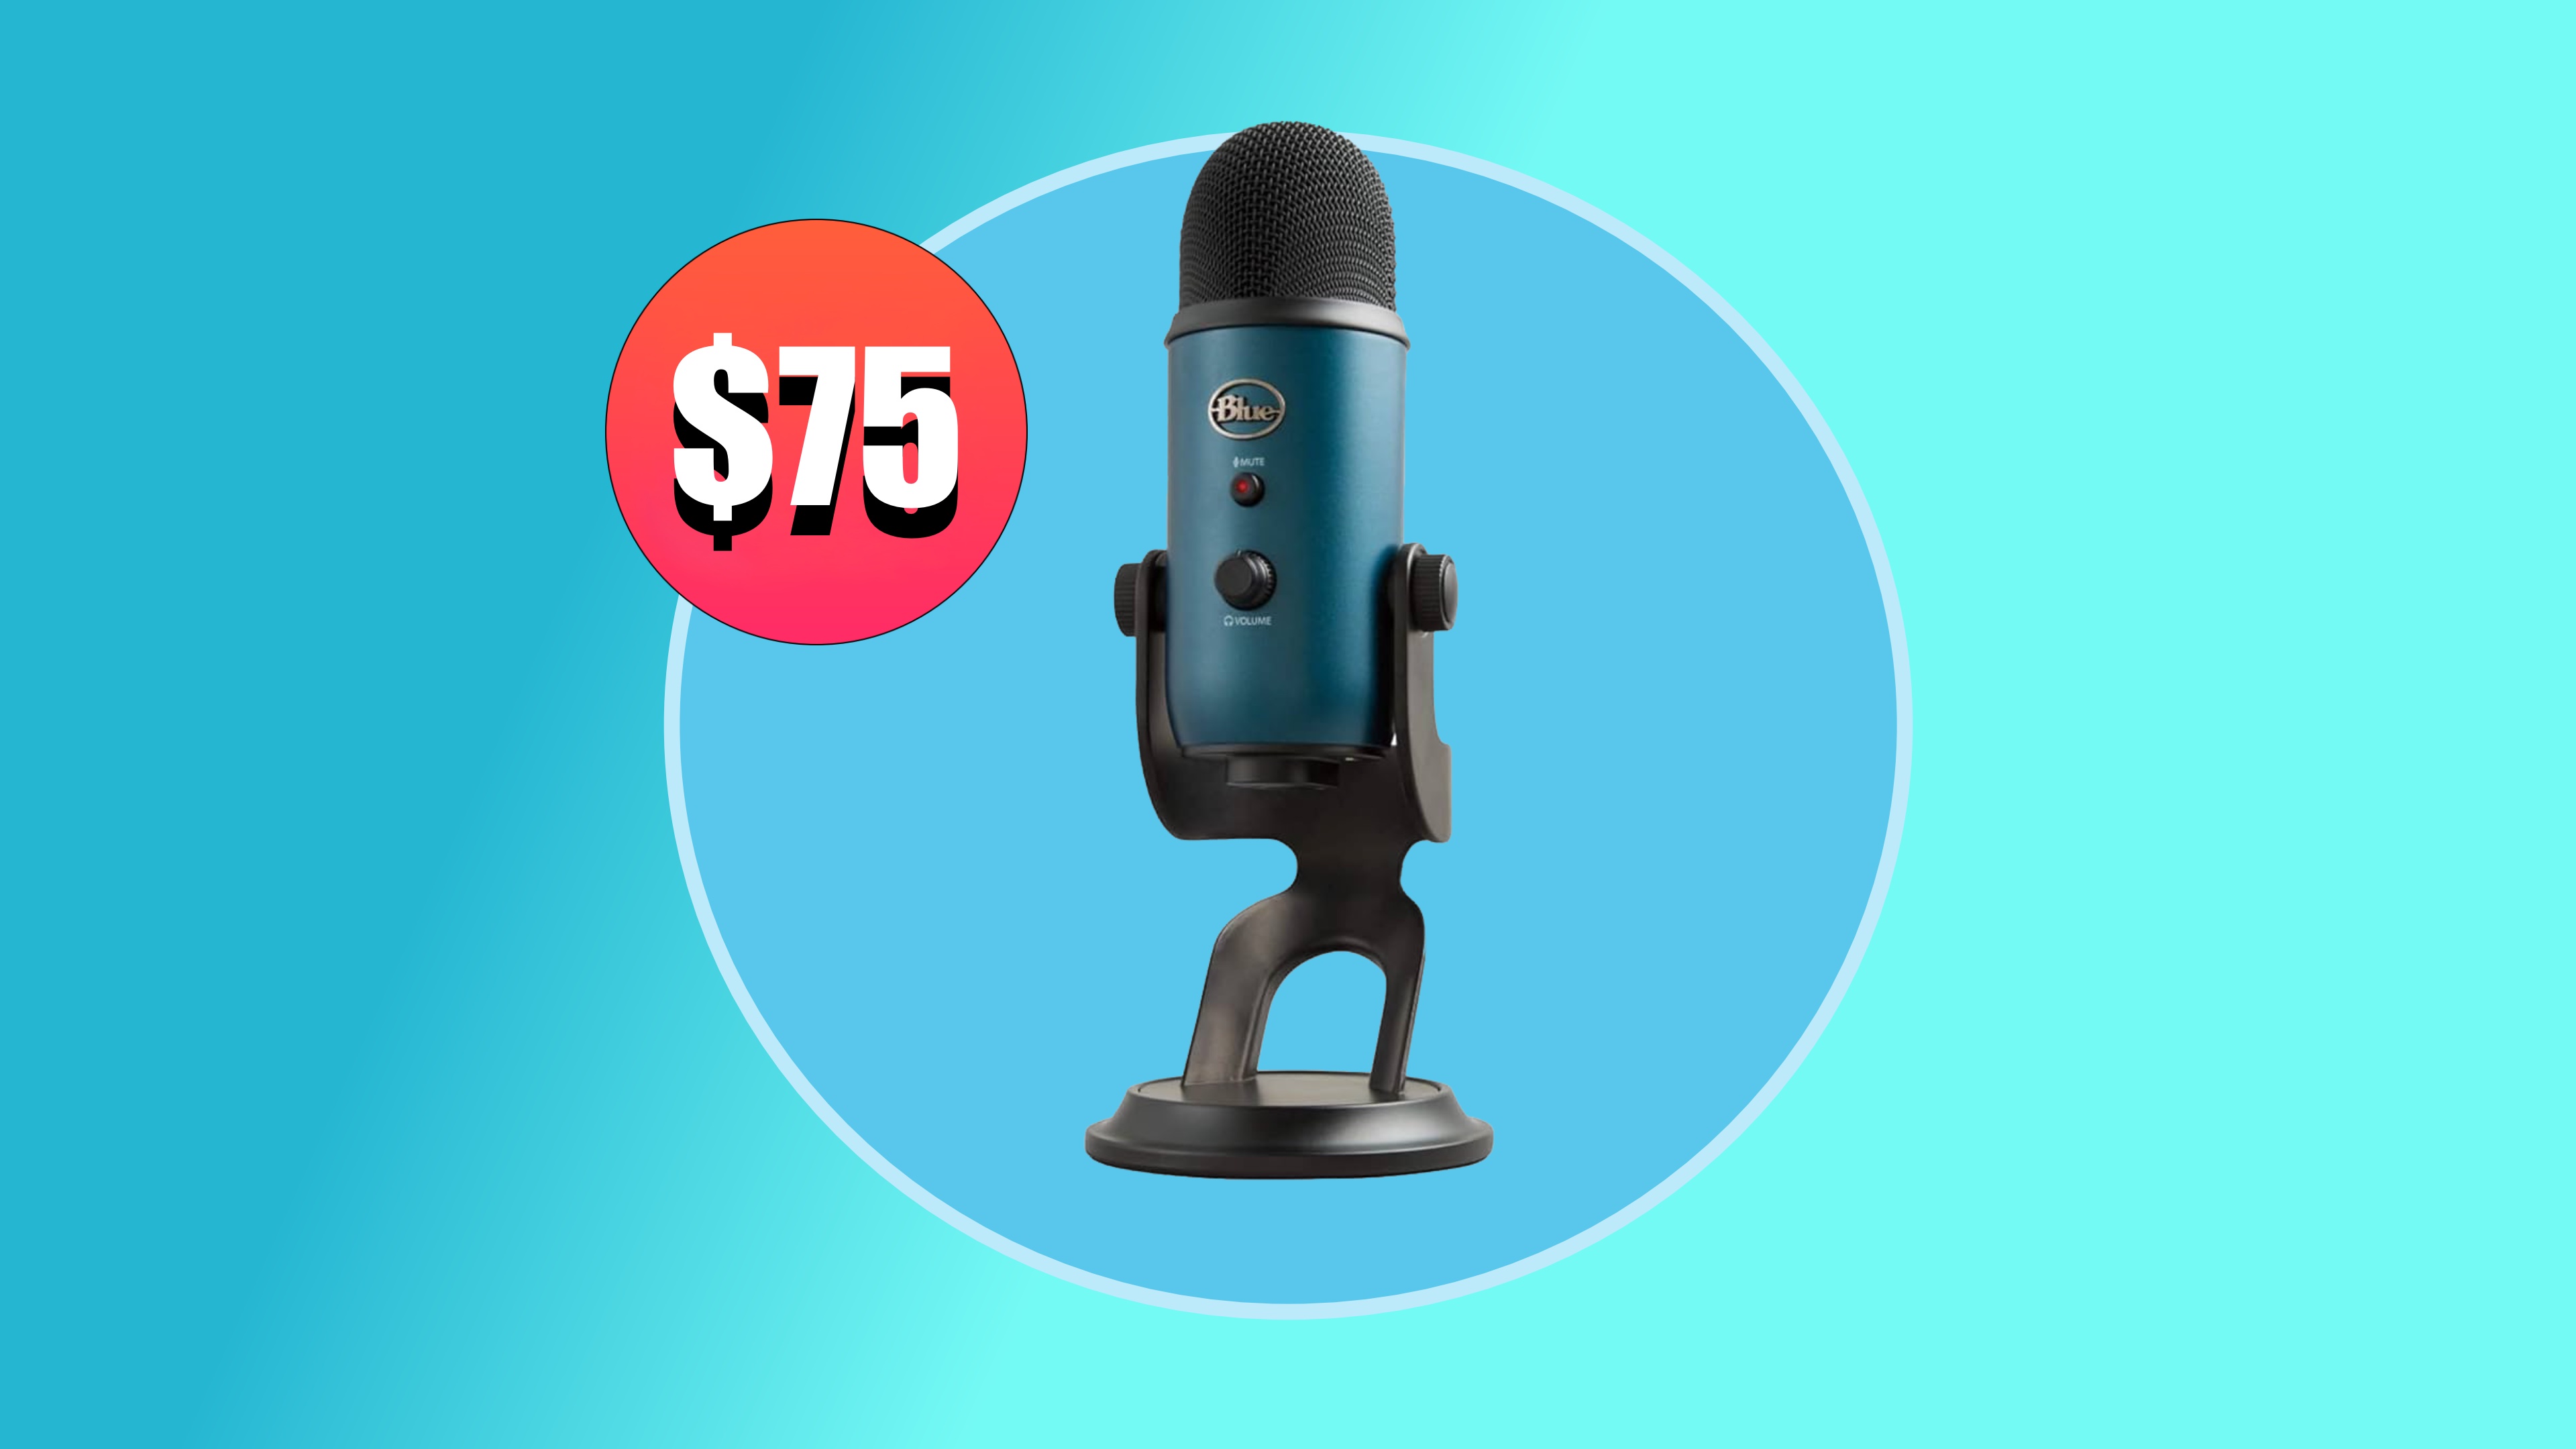 blue yeti pro xlr cable too short : r/podcasting